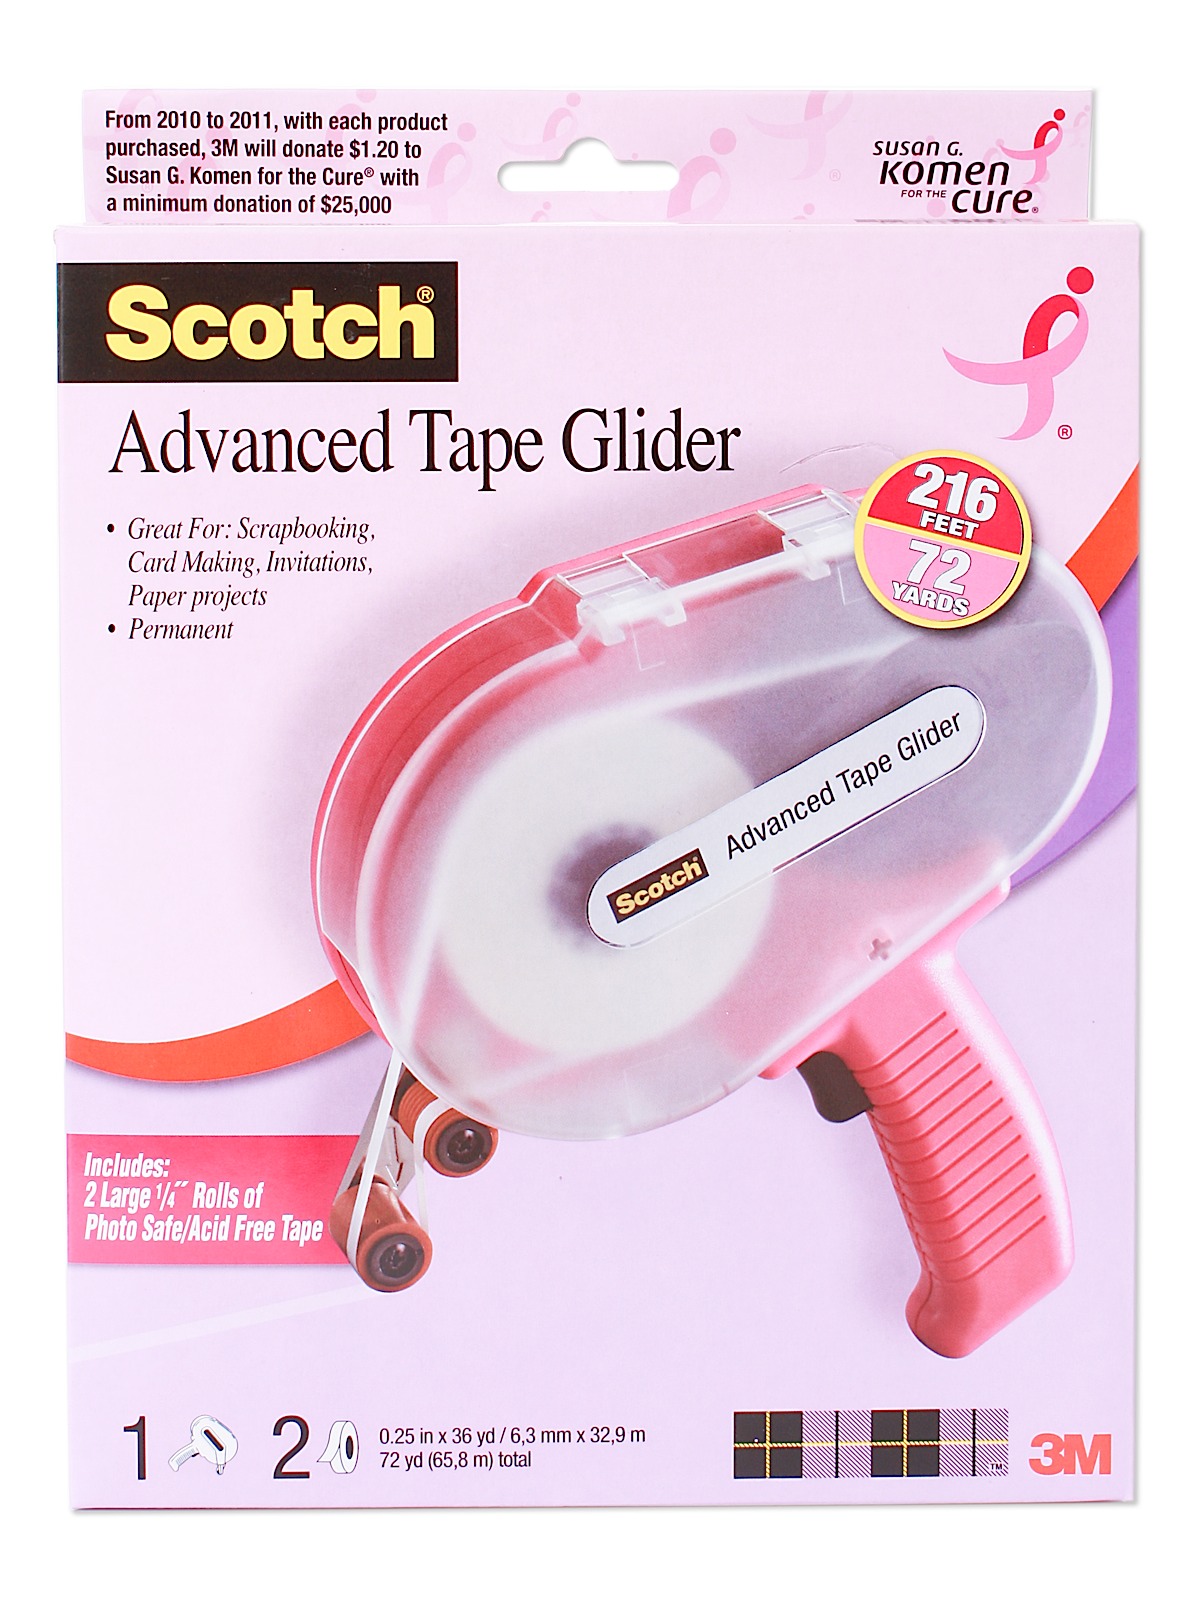 Advanced Tape Glider Tape Glider And Two Refills 1 4 In. 085